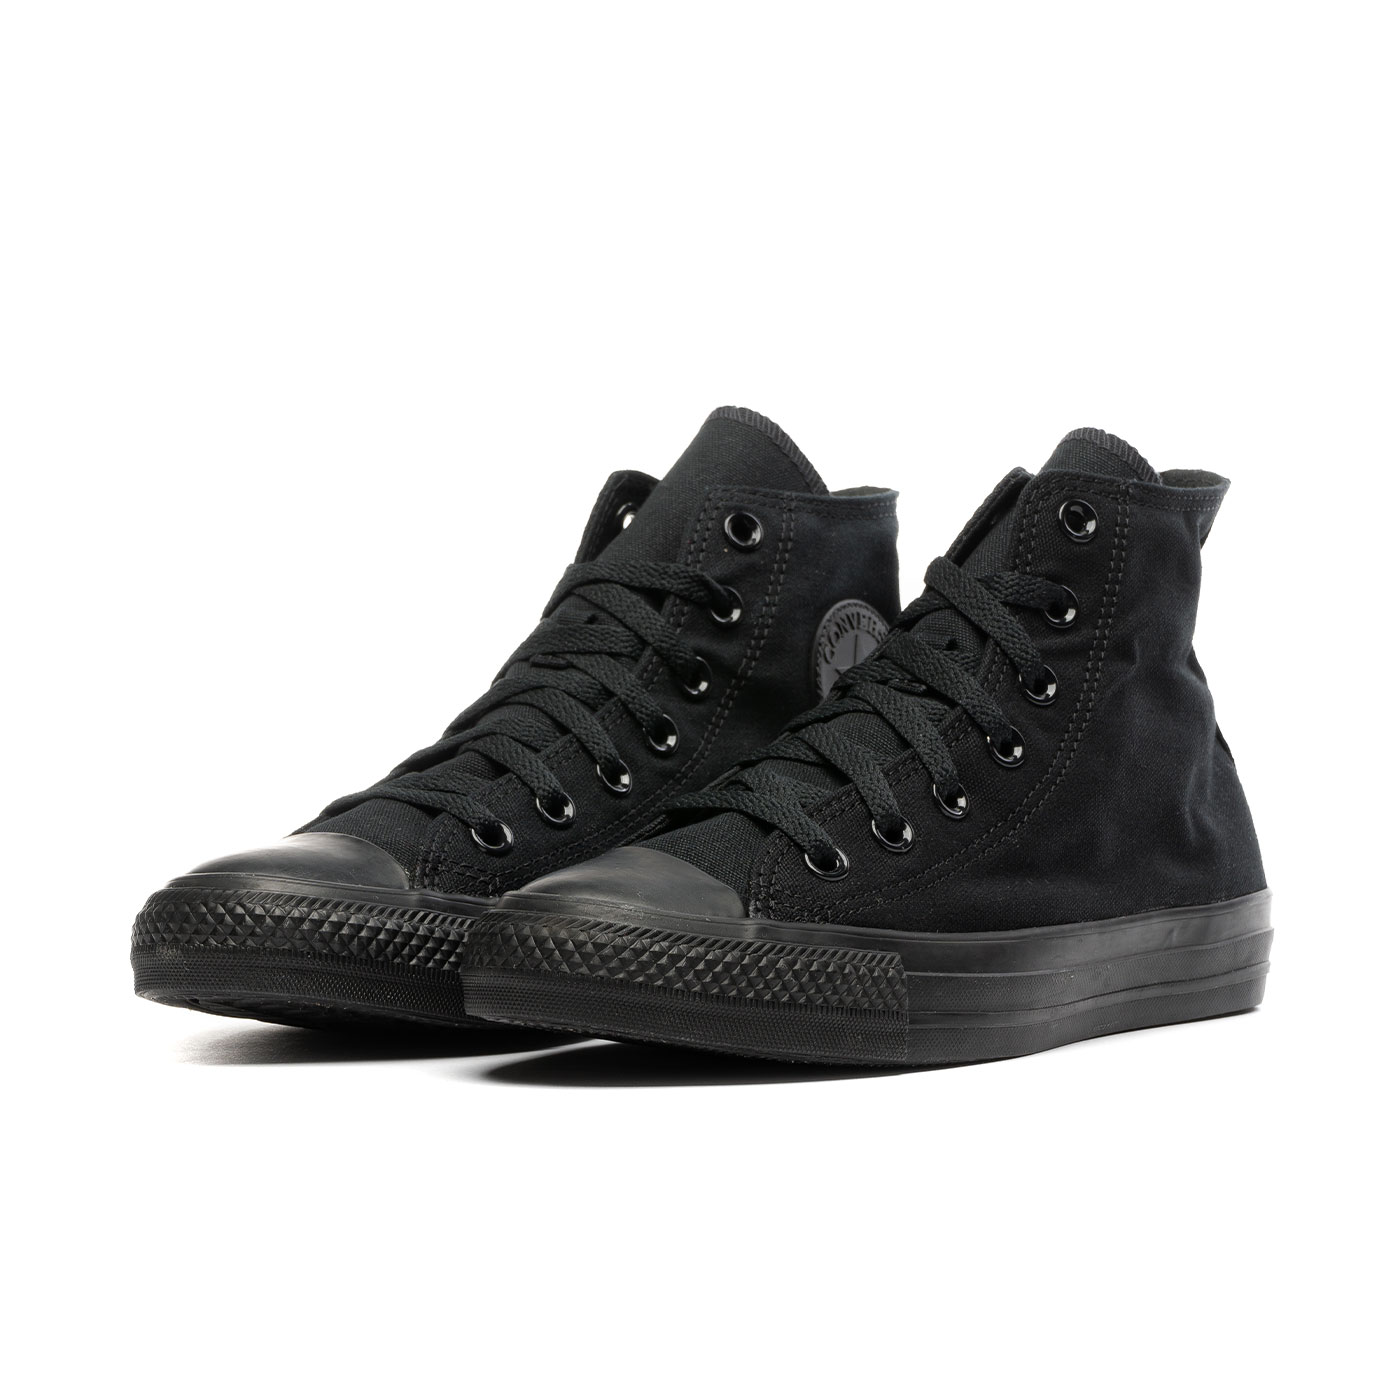 Sneakers CONVERSE Chuck Taylor All Star Hi Black for Unisex | M3310C ...